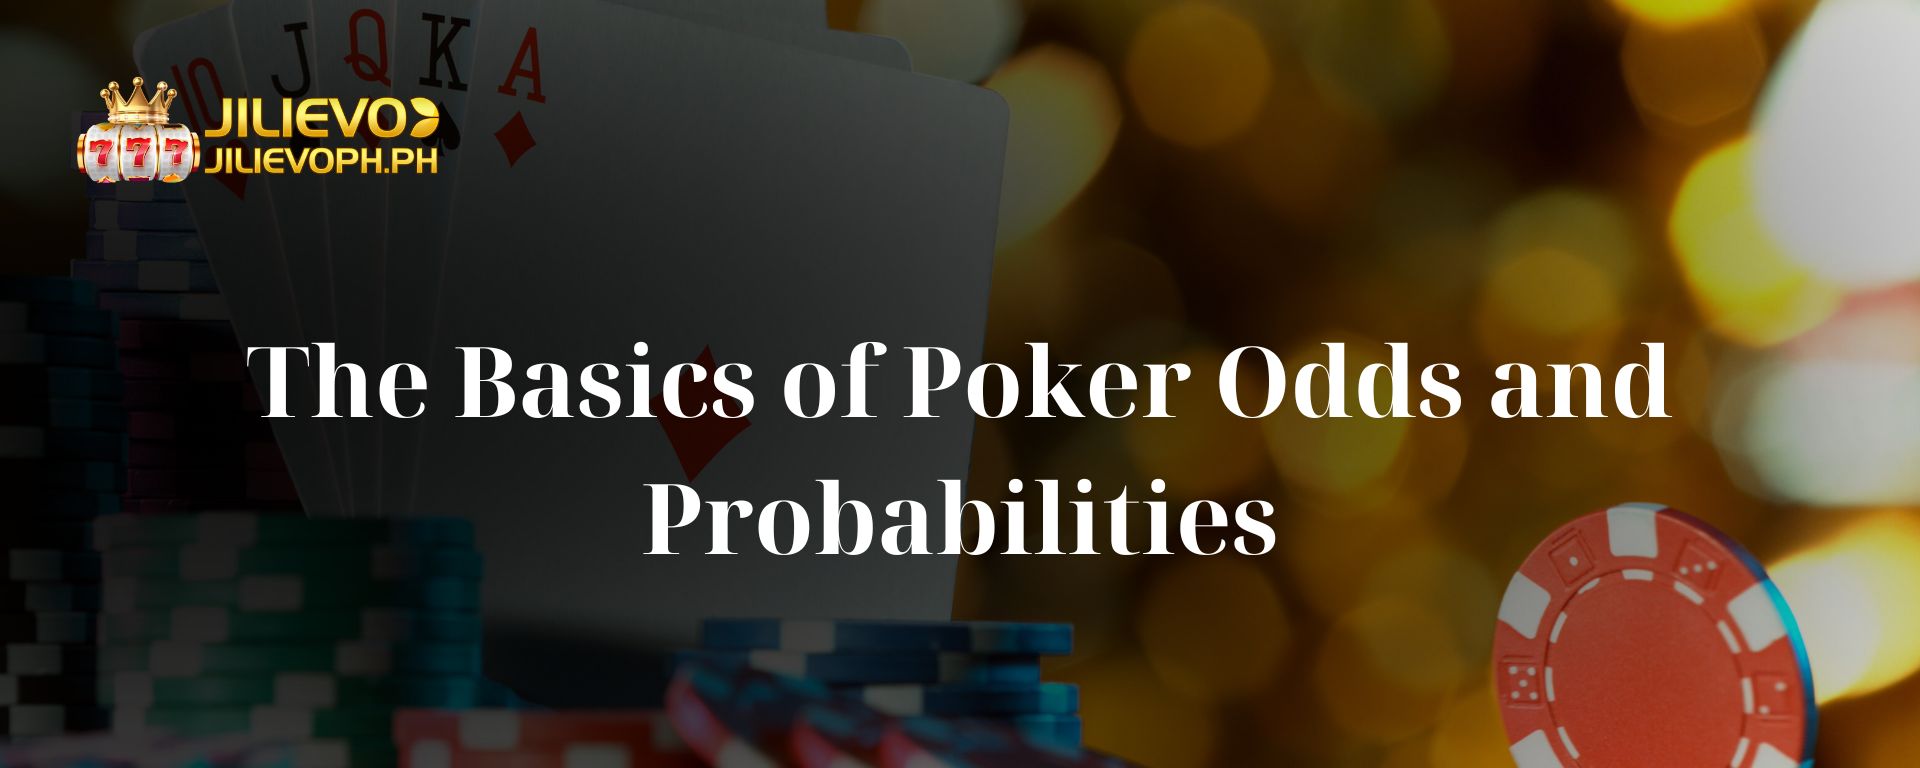 The Basics of Poker Odds and Probabilities